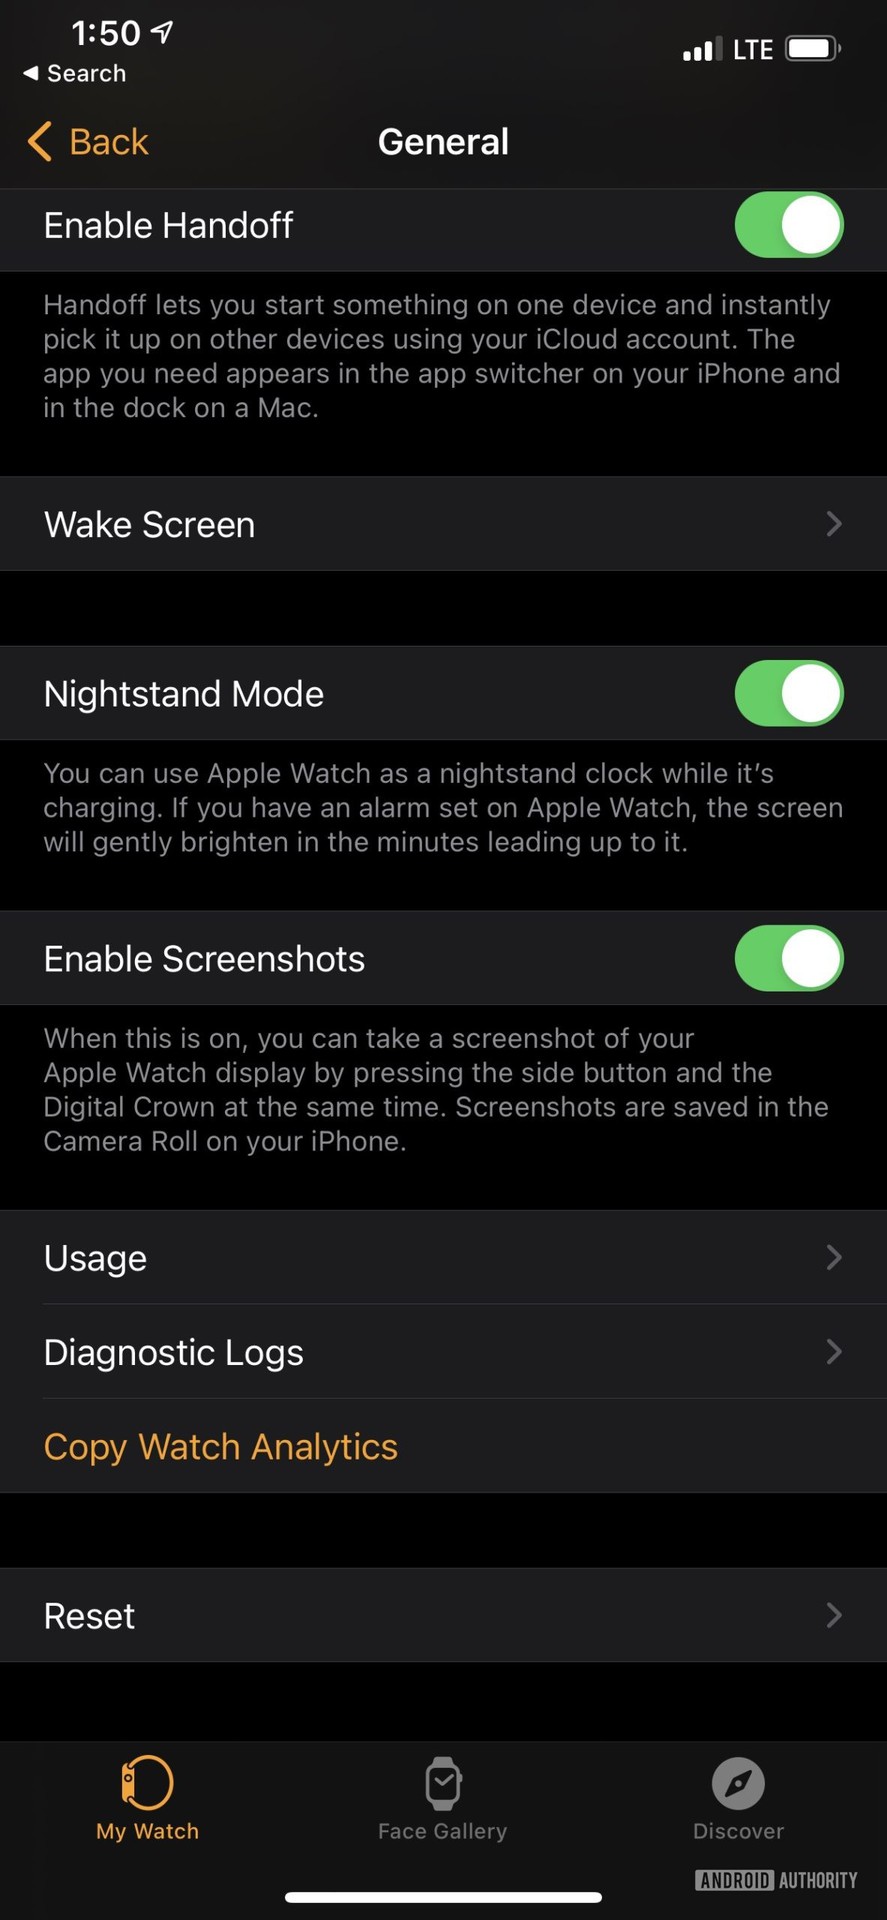 iPhone screenshot illustrates how to reset Apple Watch from the iPhone